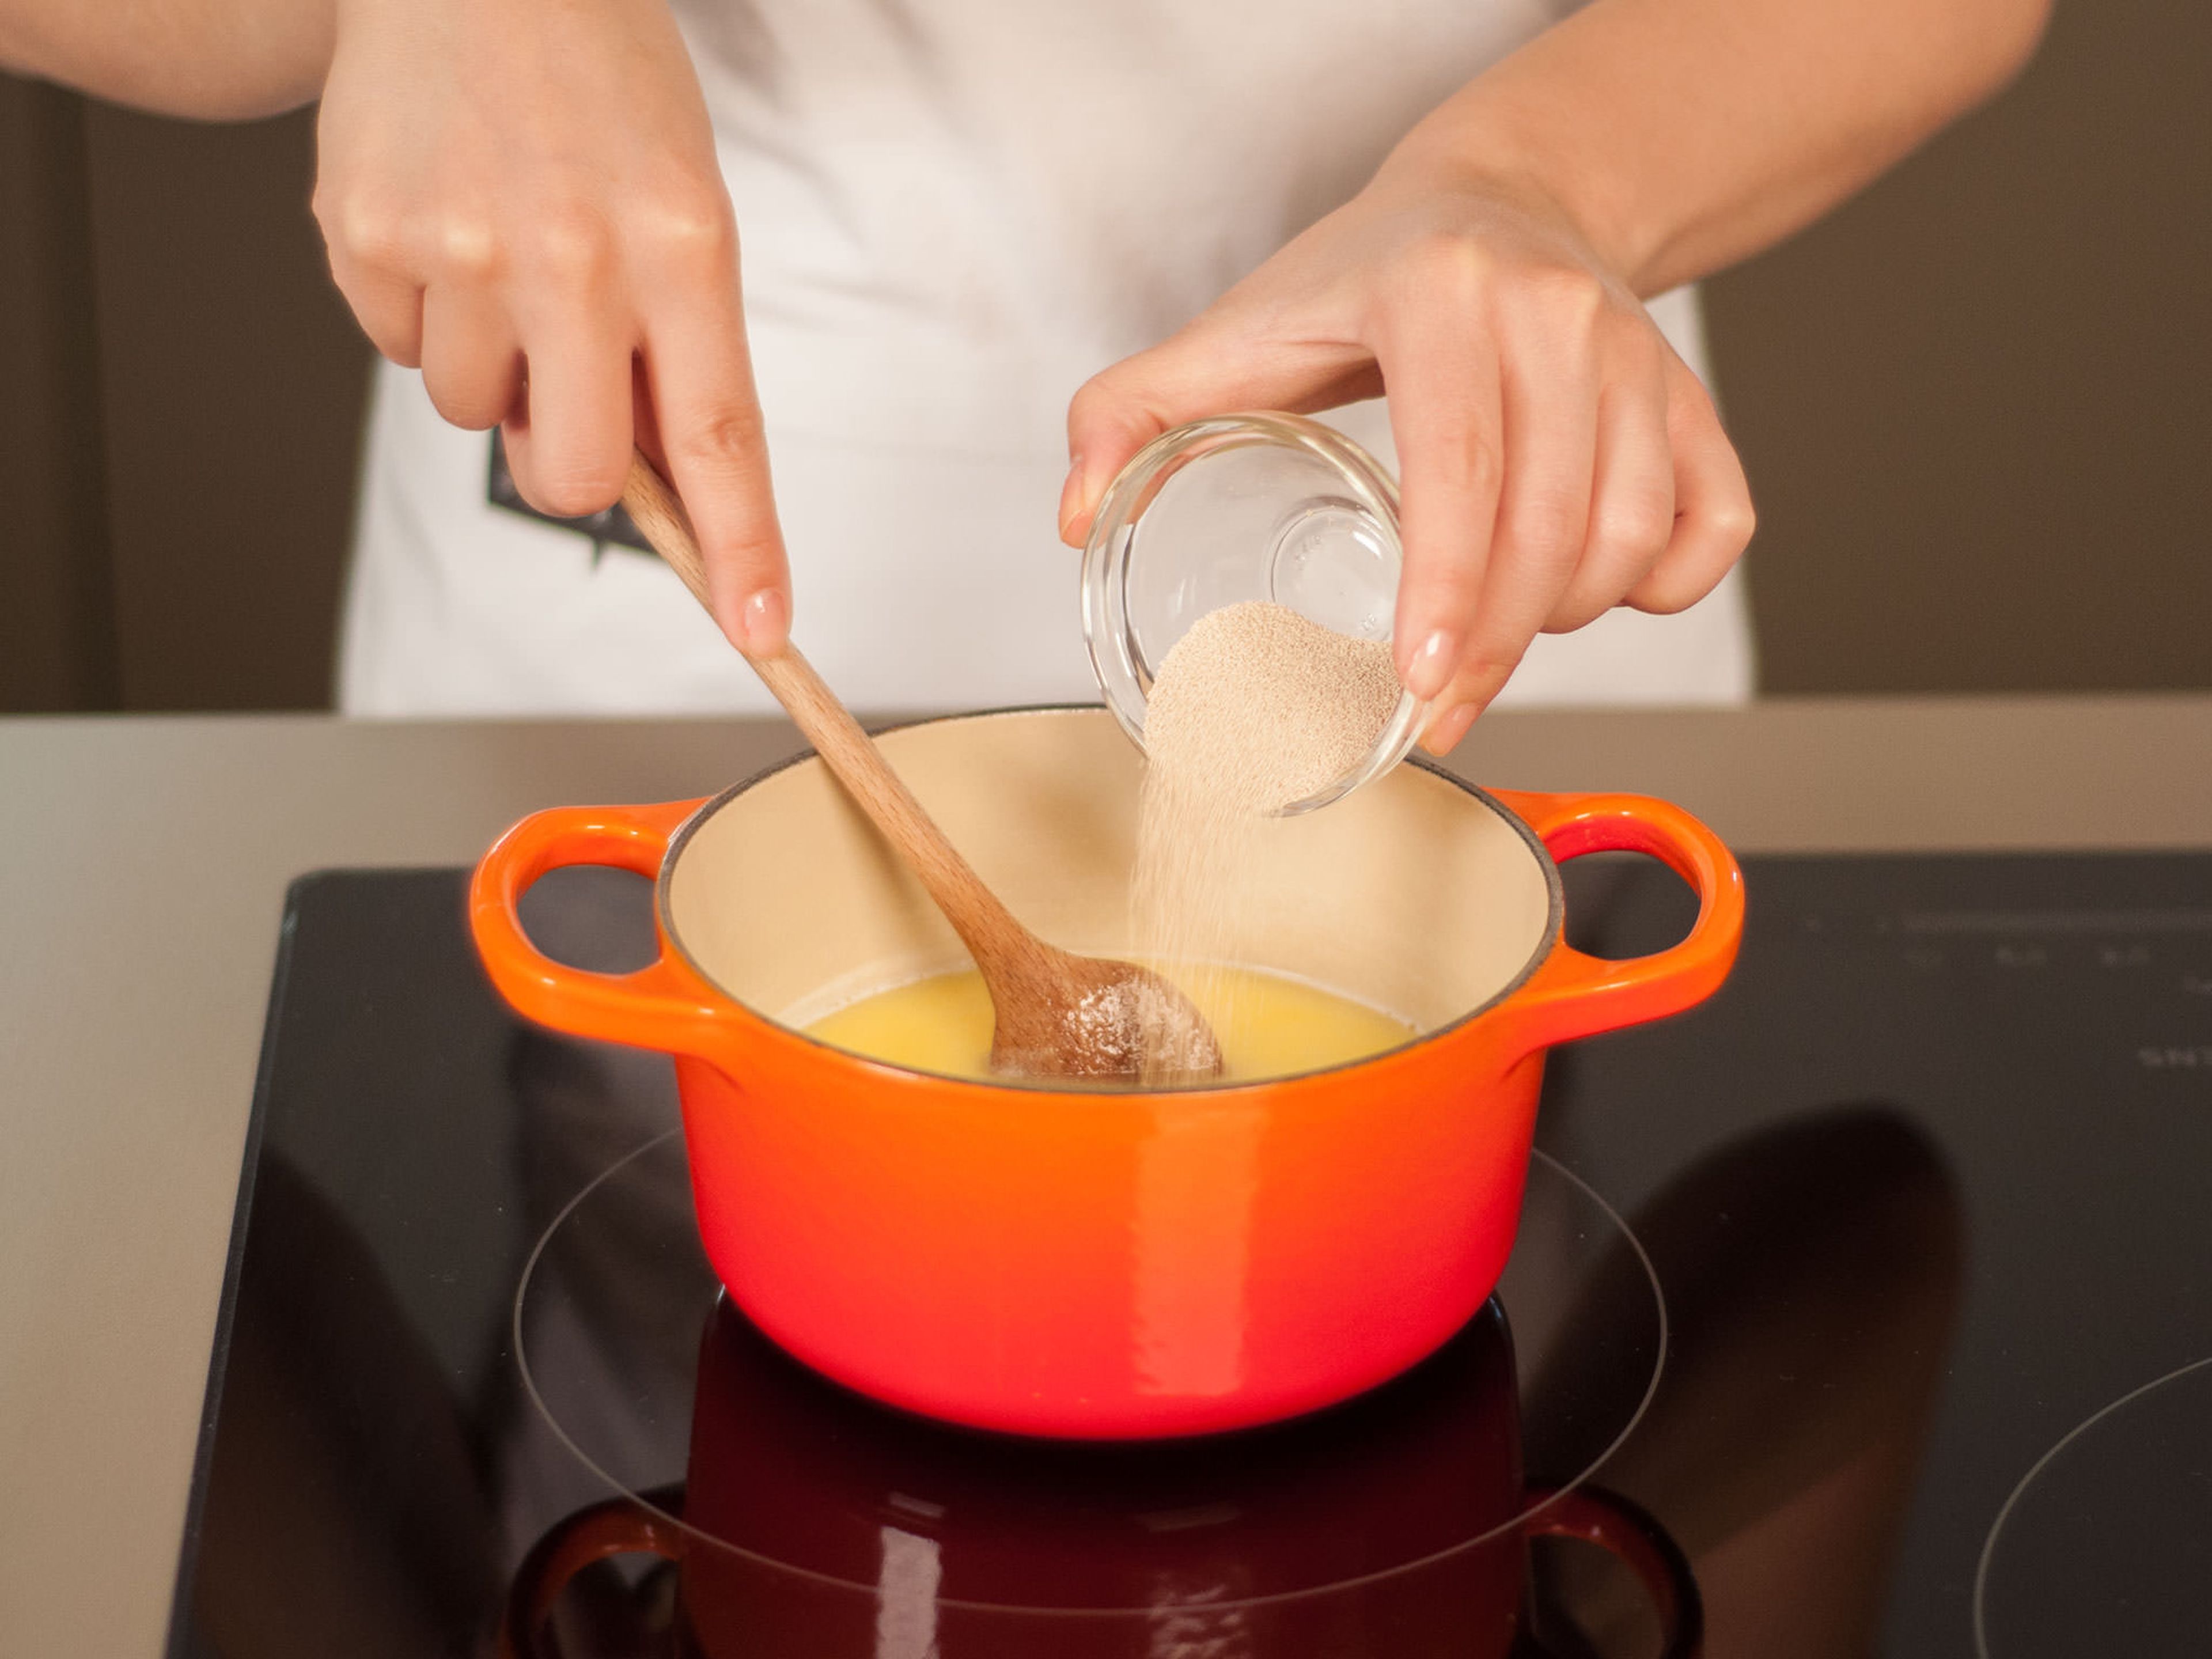 Heat milk in a small saucepan over low-medium heat. Add butter and slowly melt. Remove from heat, let cool until just barely warm, and gradually add the sugar and dry yeast. Stir to combine.